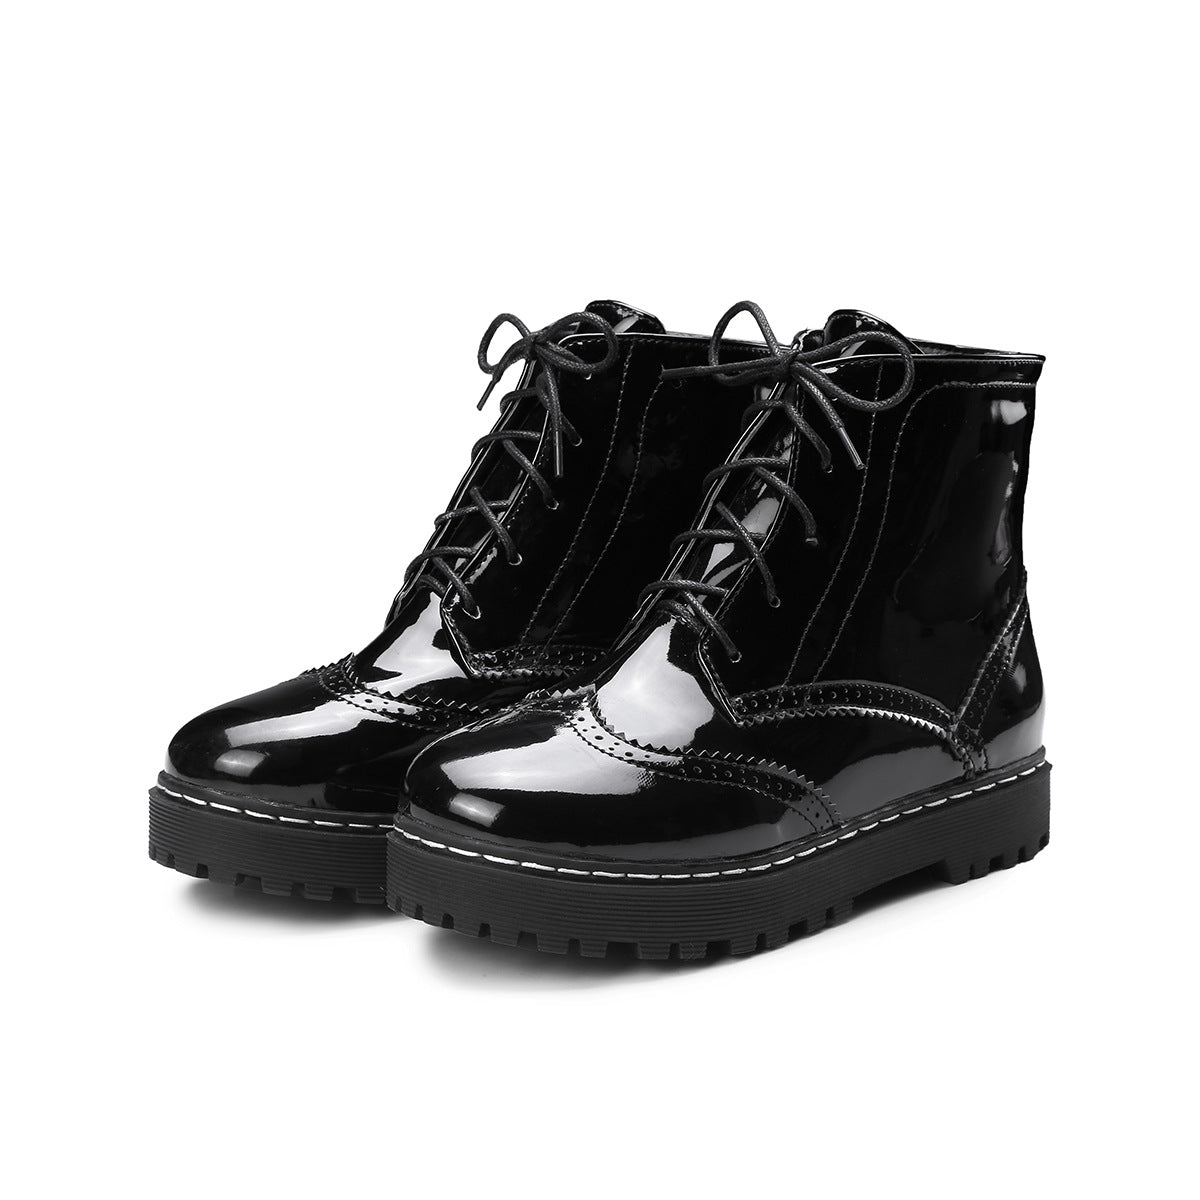 patent leather lace up ankle boots